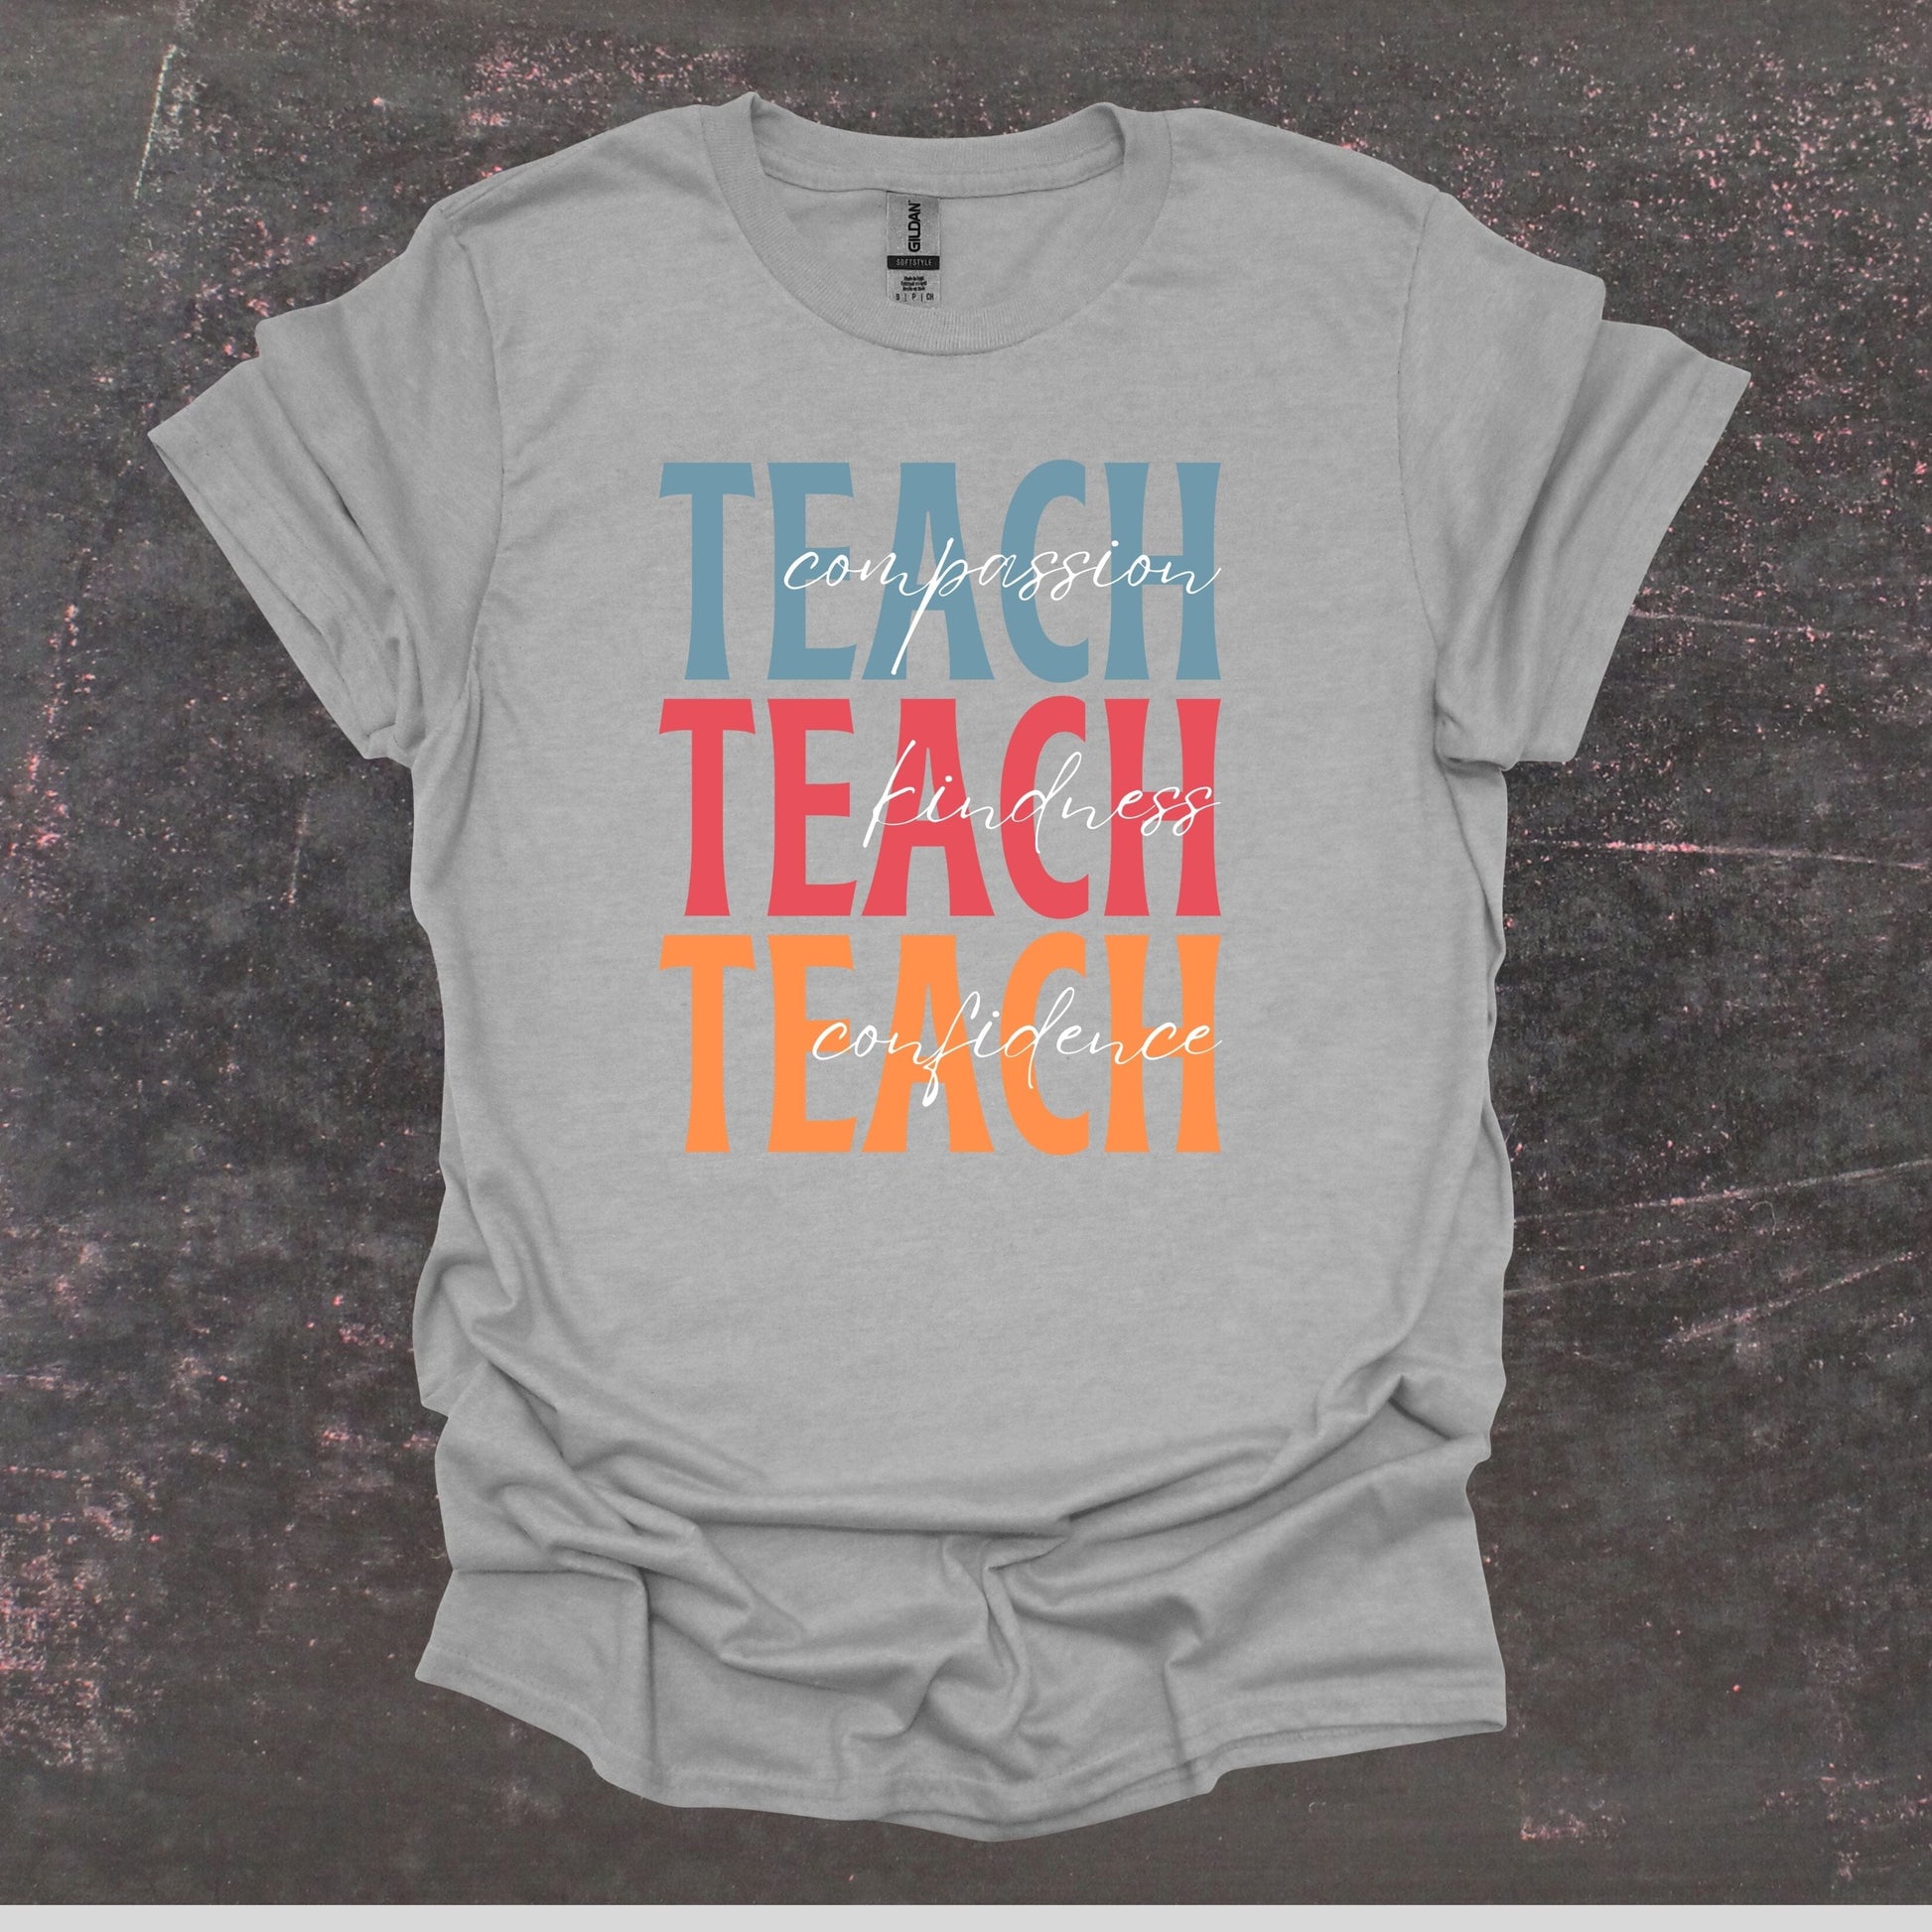 Teach Compassion Kindness Confidence - Teacher T Shirt - Adult Tee Shirts T-Shirts Graphic Avenue Sport Grey Adult Small 